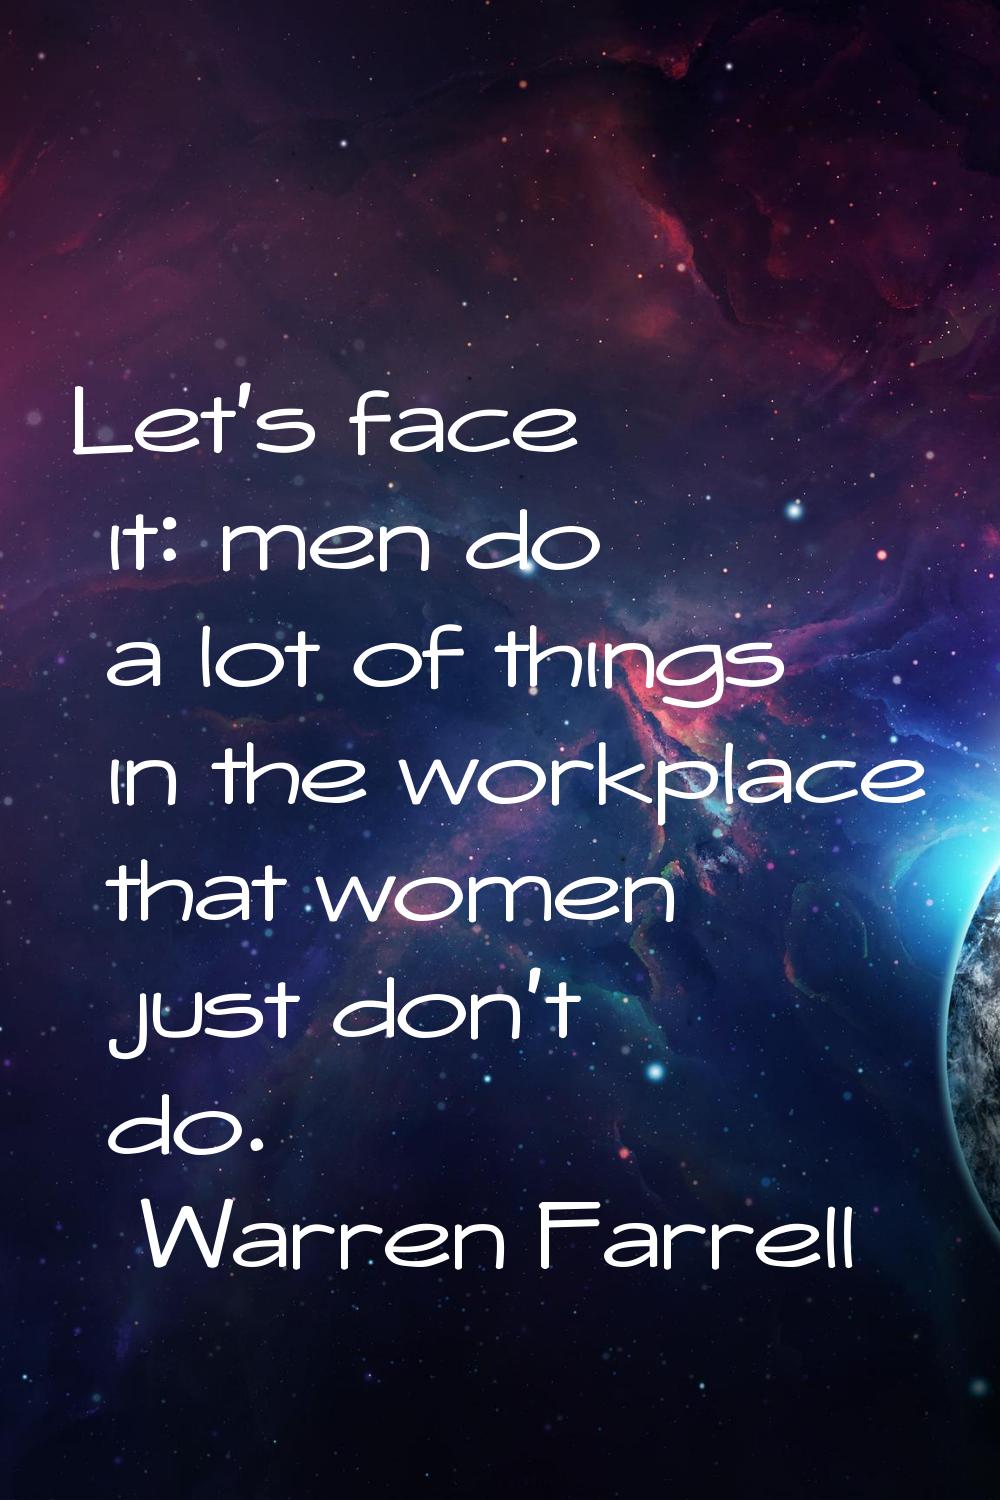 Let's face it: men do a lot of things in the workplace that women just don't do.